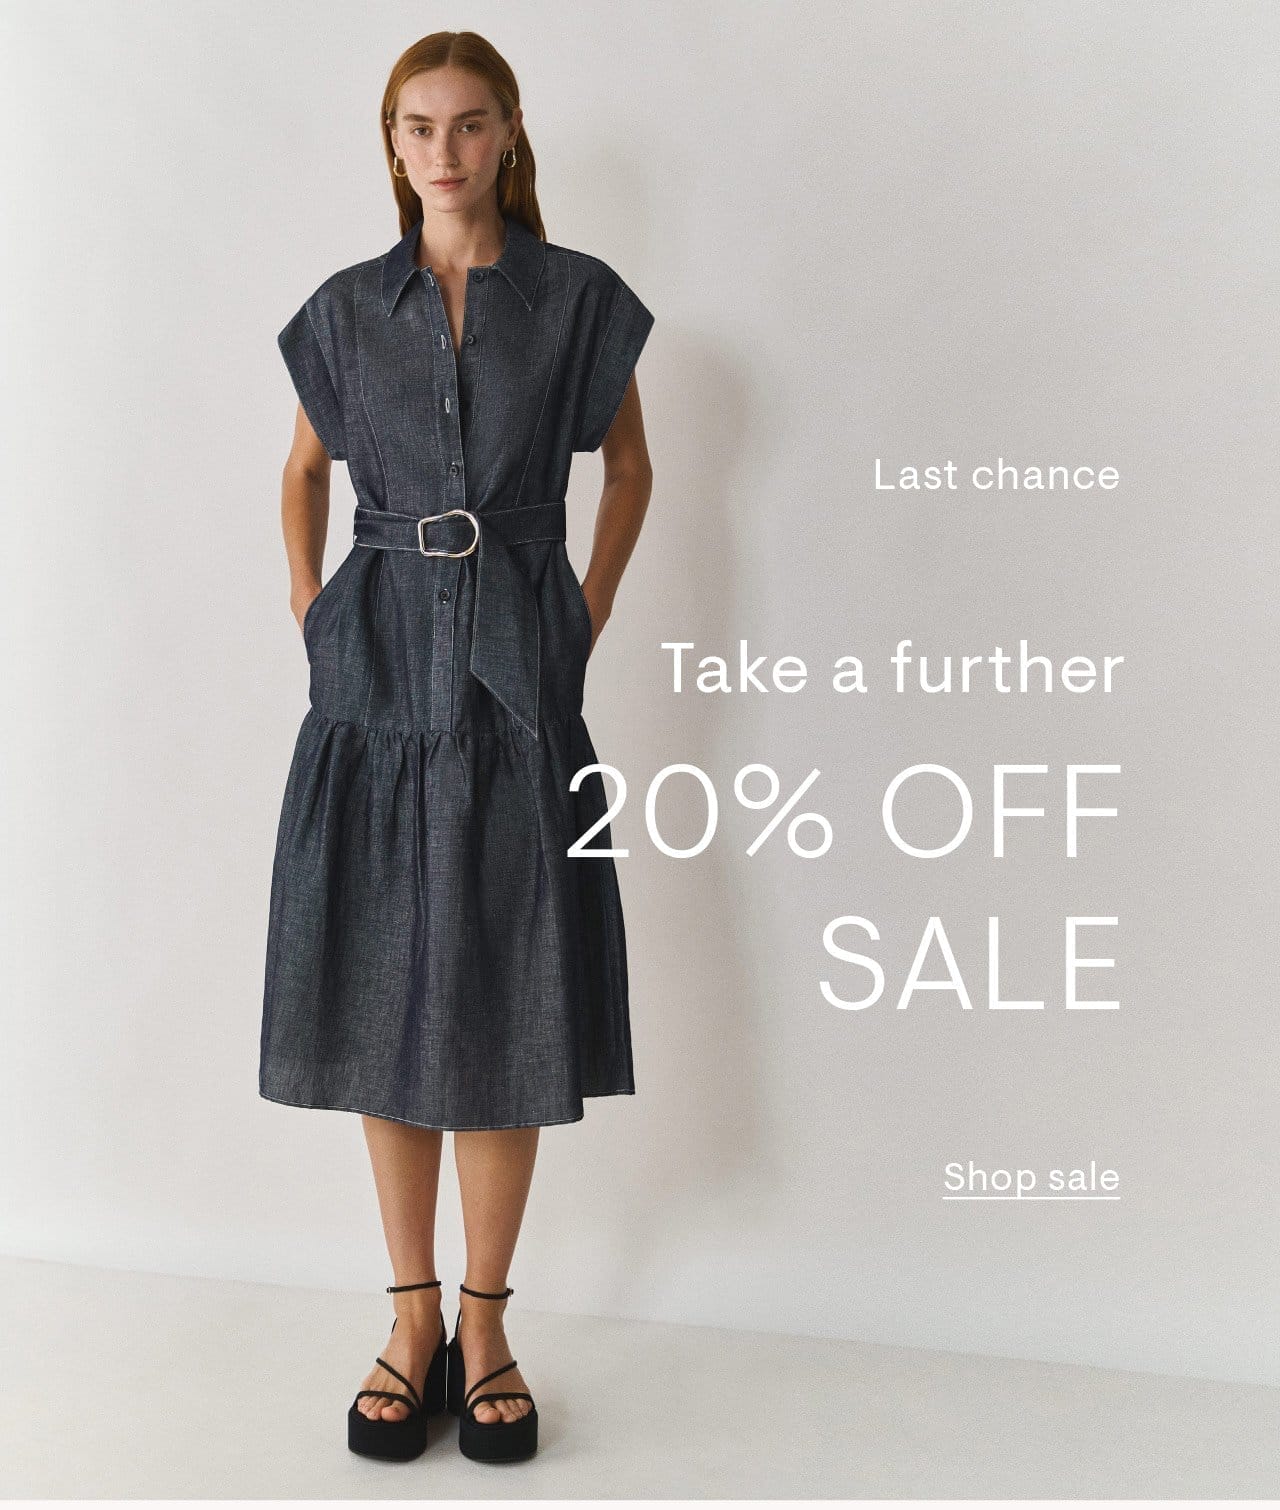 Last Chance. Take a further 20% off SALE